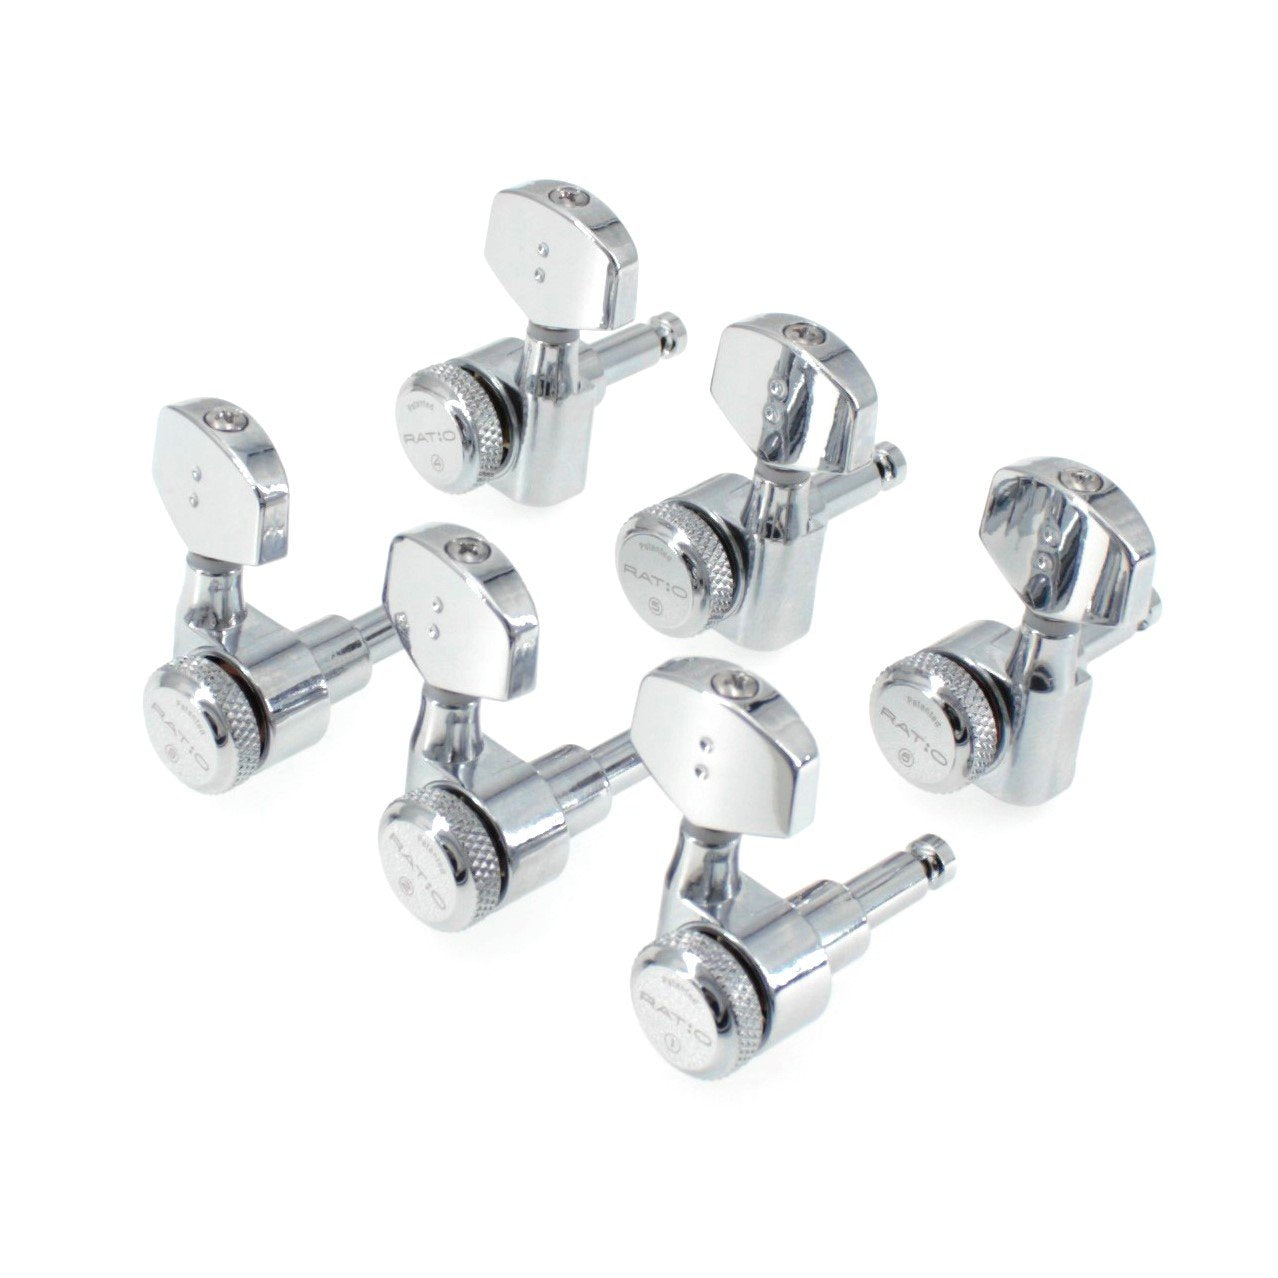 3+3 Ratio Lefty Electric Locking Machine Heads Contemporary Button (Select Finish) - Graph Tech Guitar Labs Ltd.